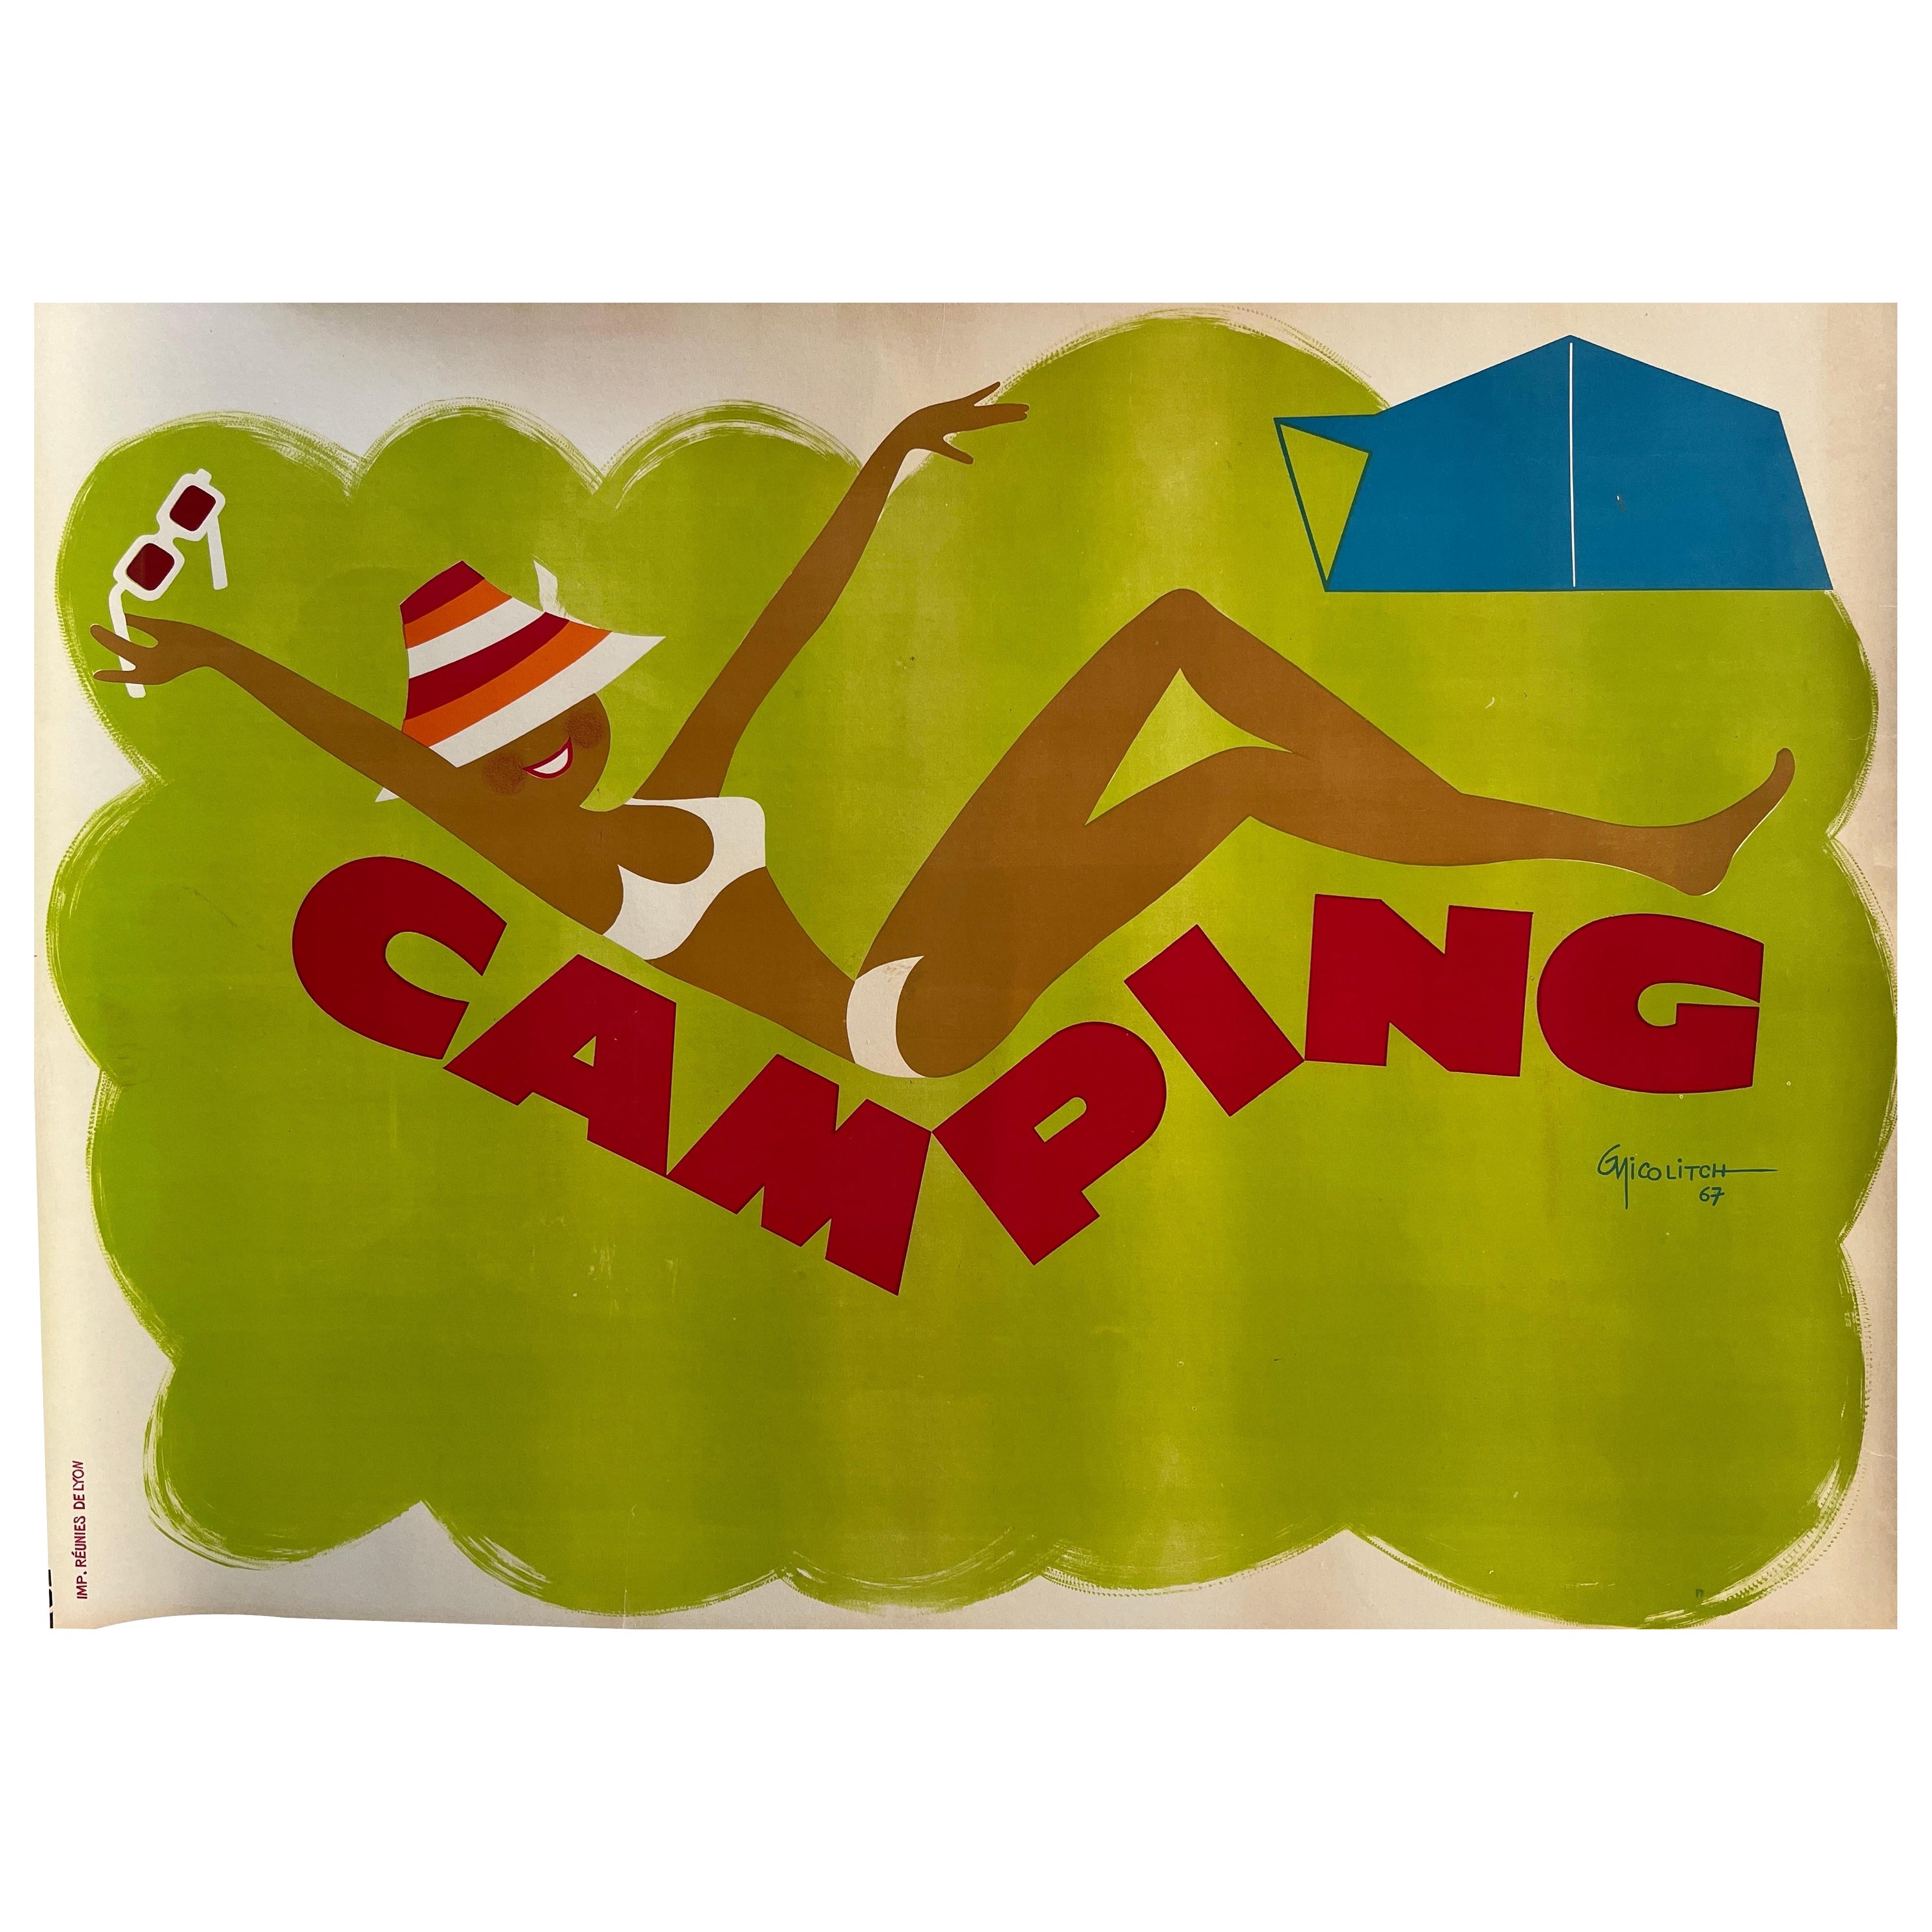 Original Vintage French 1960's Poster, 'Camping' by G. Nicolitch